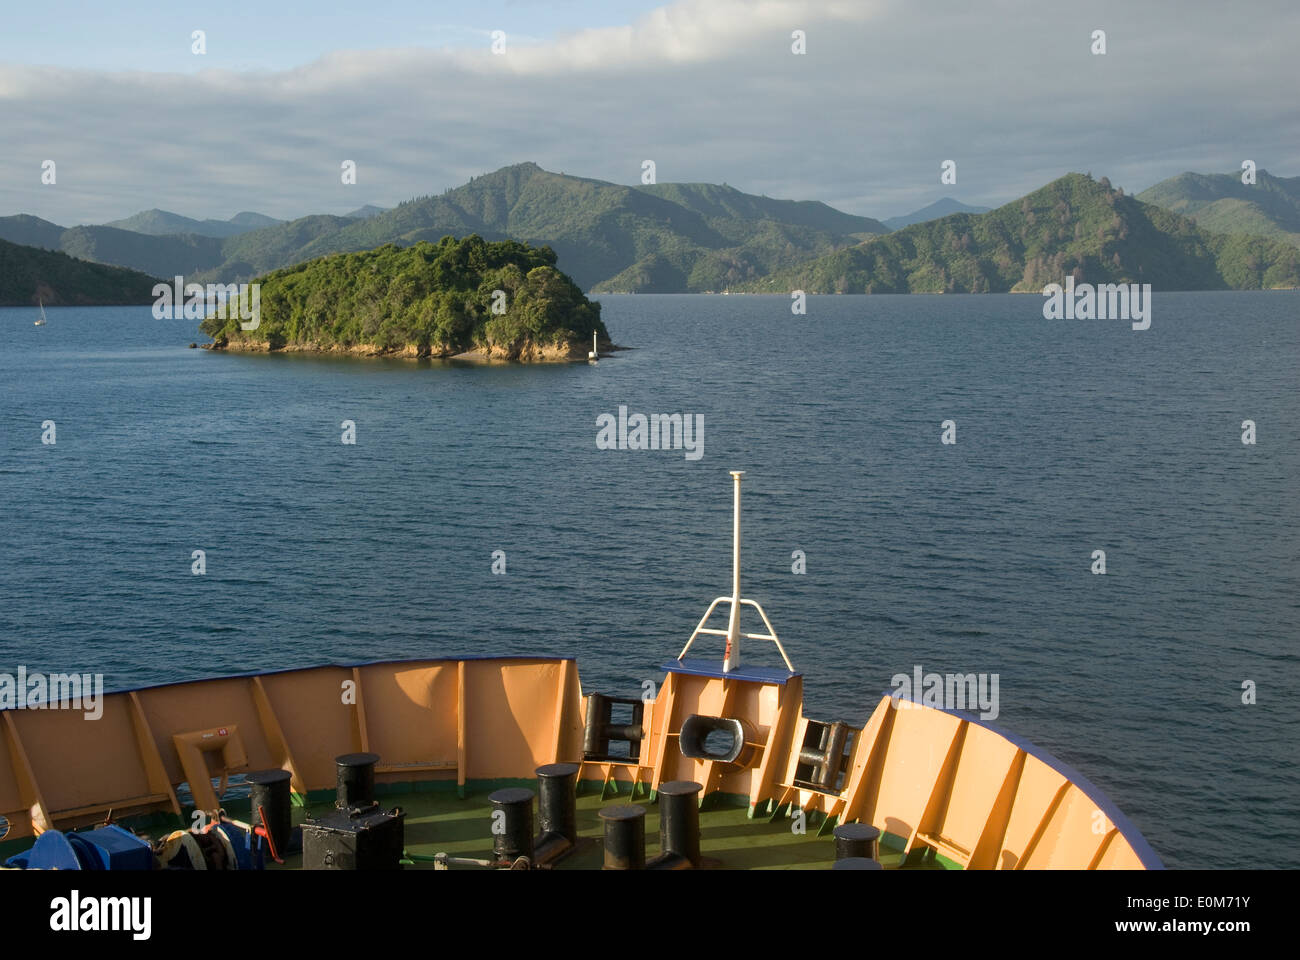 Inter Island Ferry, Picton, Queen Charlotte Sound, Marlborough Sounds, South Island, New Zealand Stock Photo